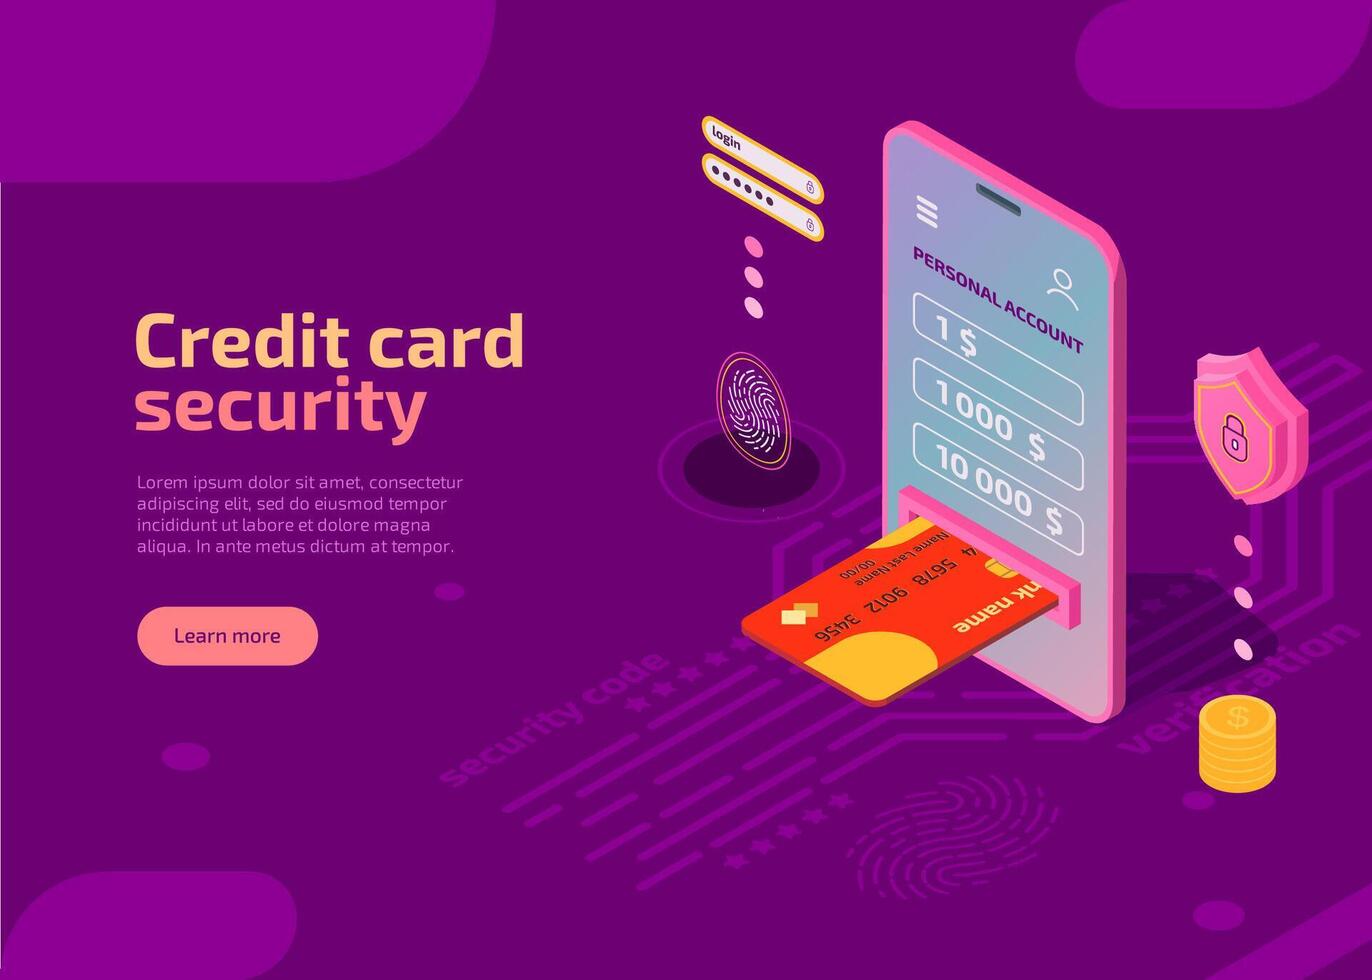 Credit card security isometric landing page. Money and personal data protection, secure payments concept. Bank payment application, shield guard to protect identity information on smartphone screen. vector